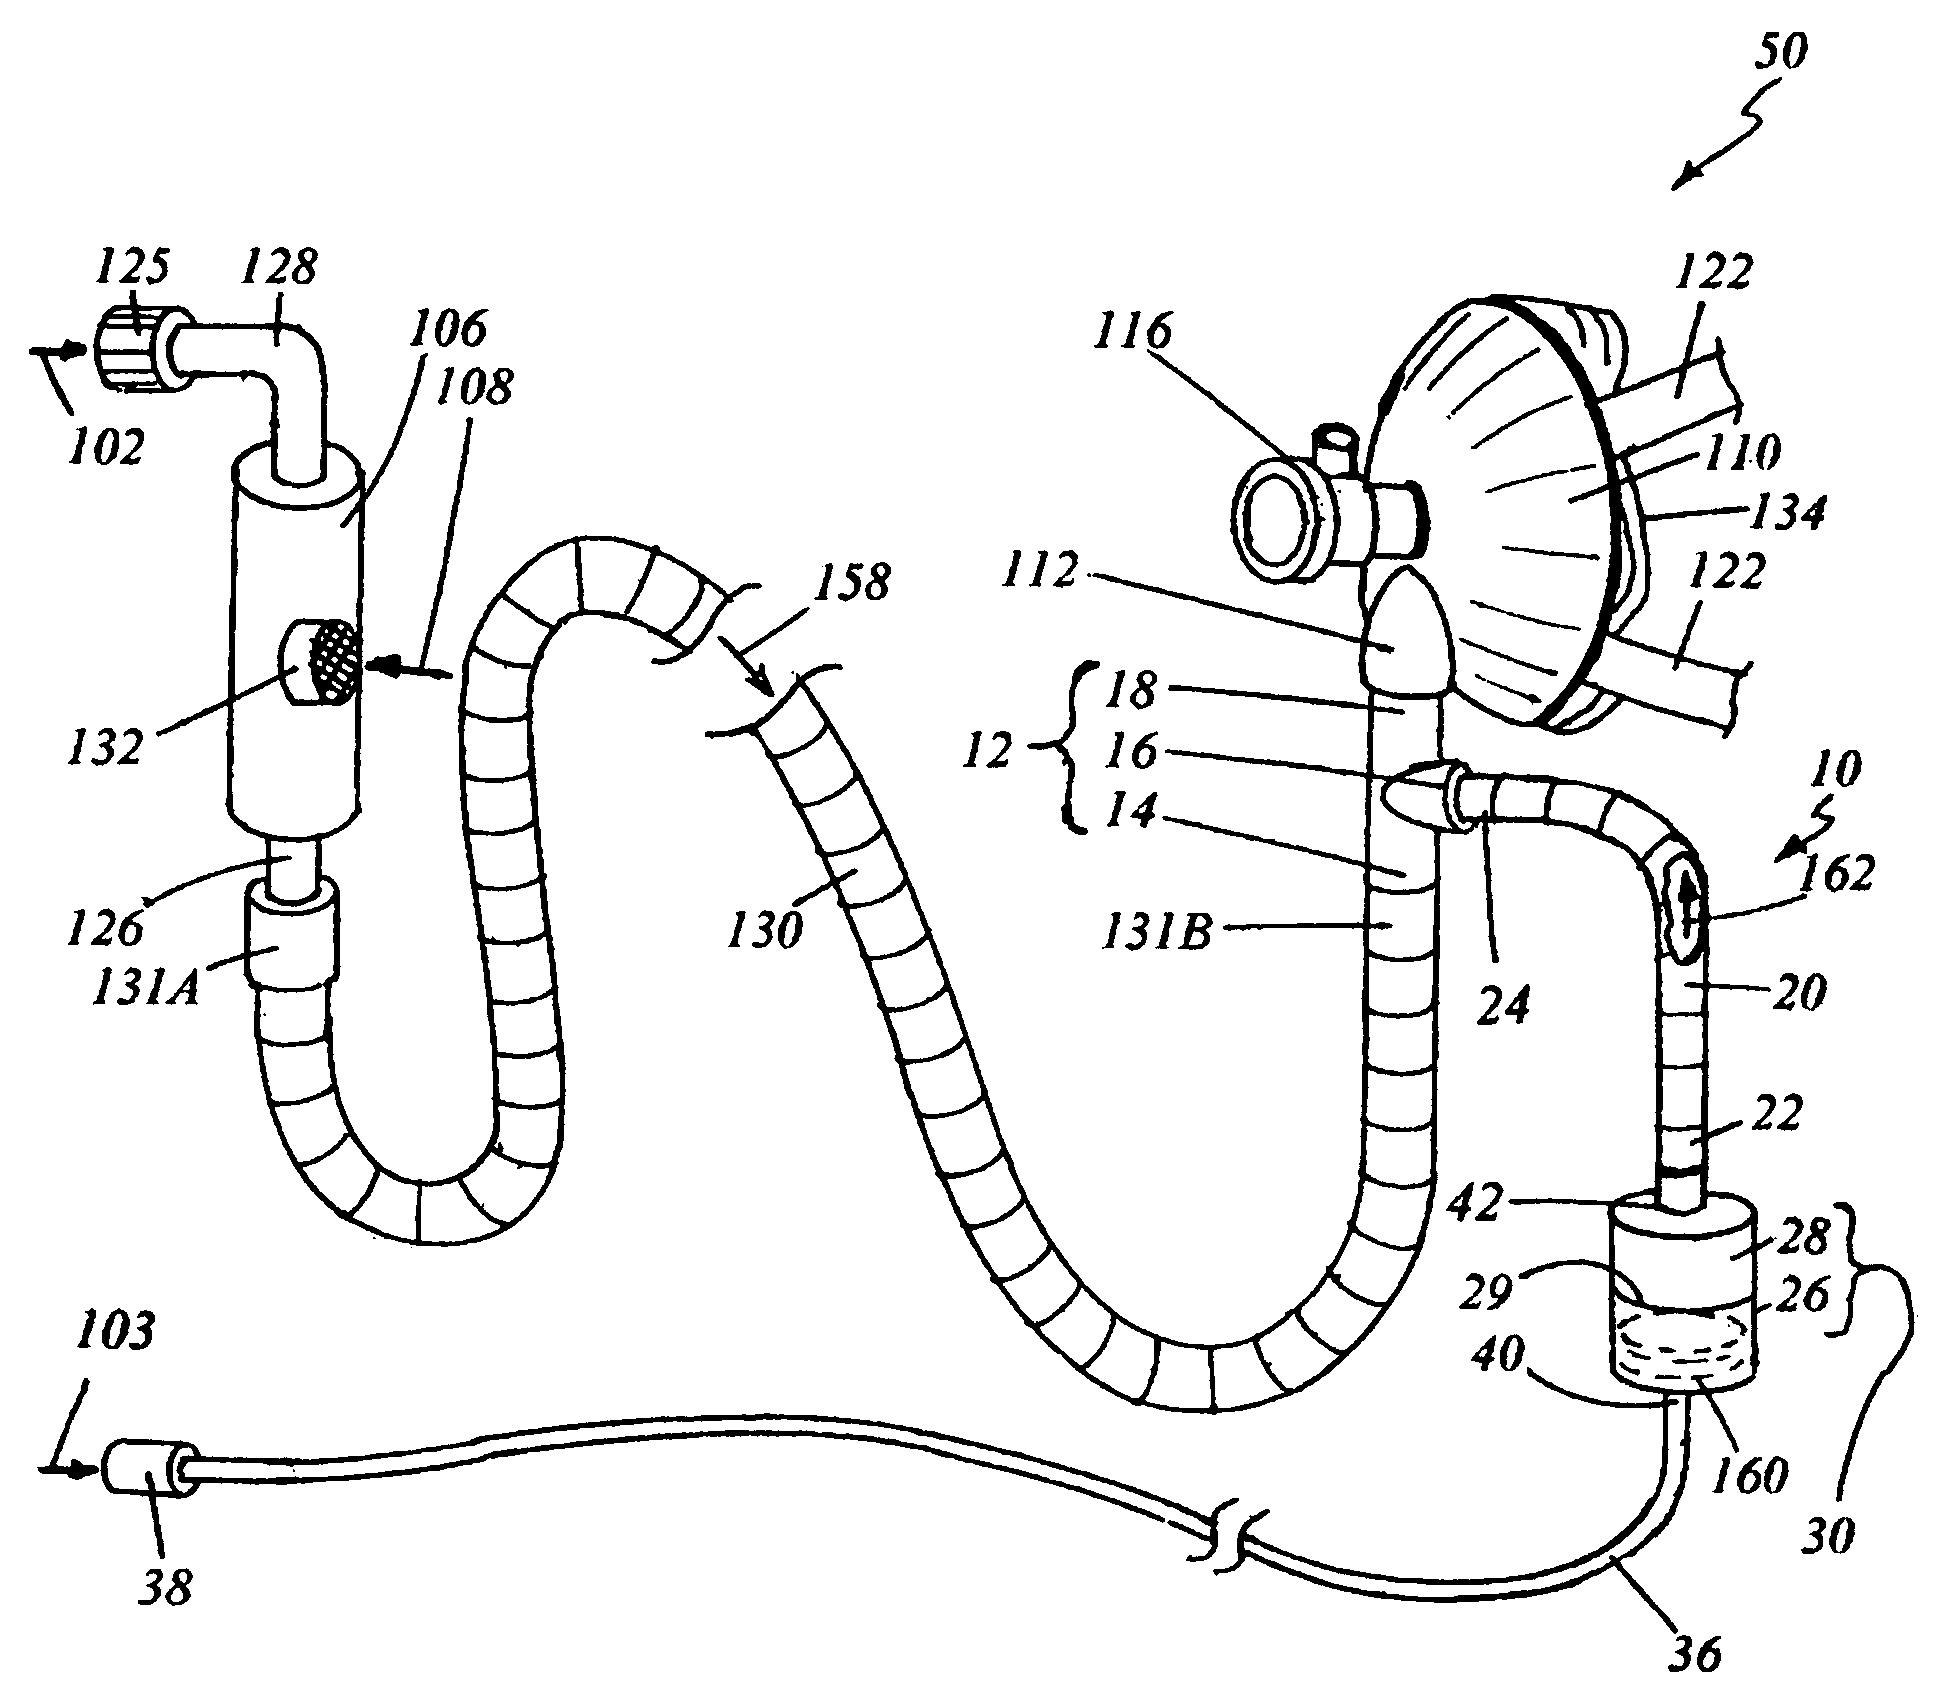 Medication delivery device and method